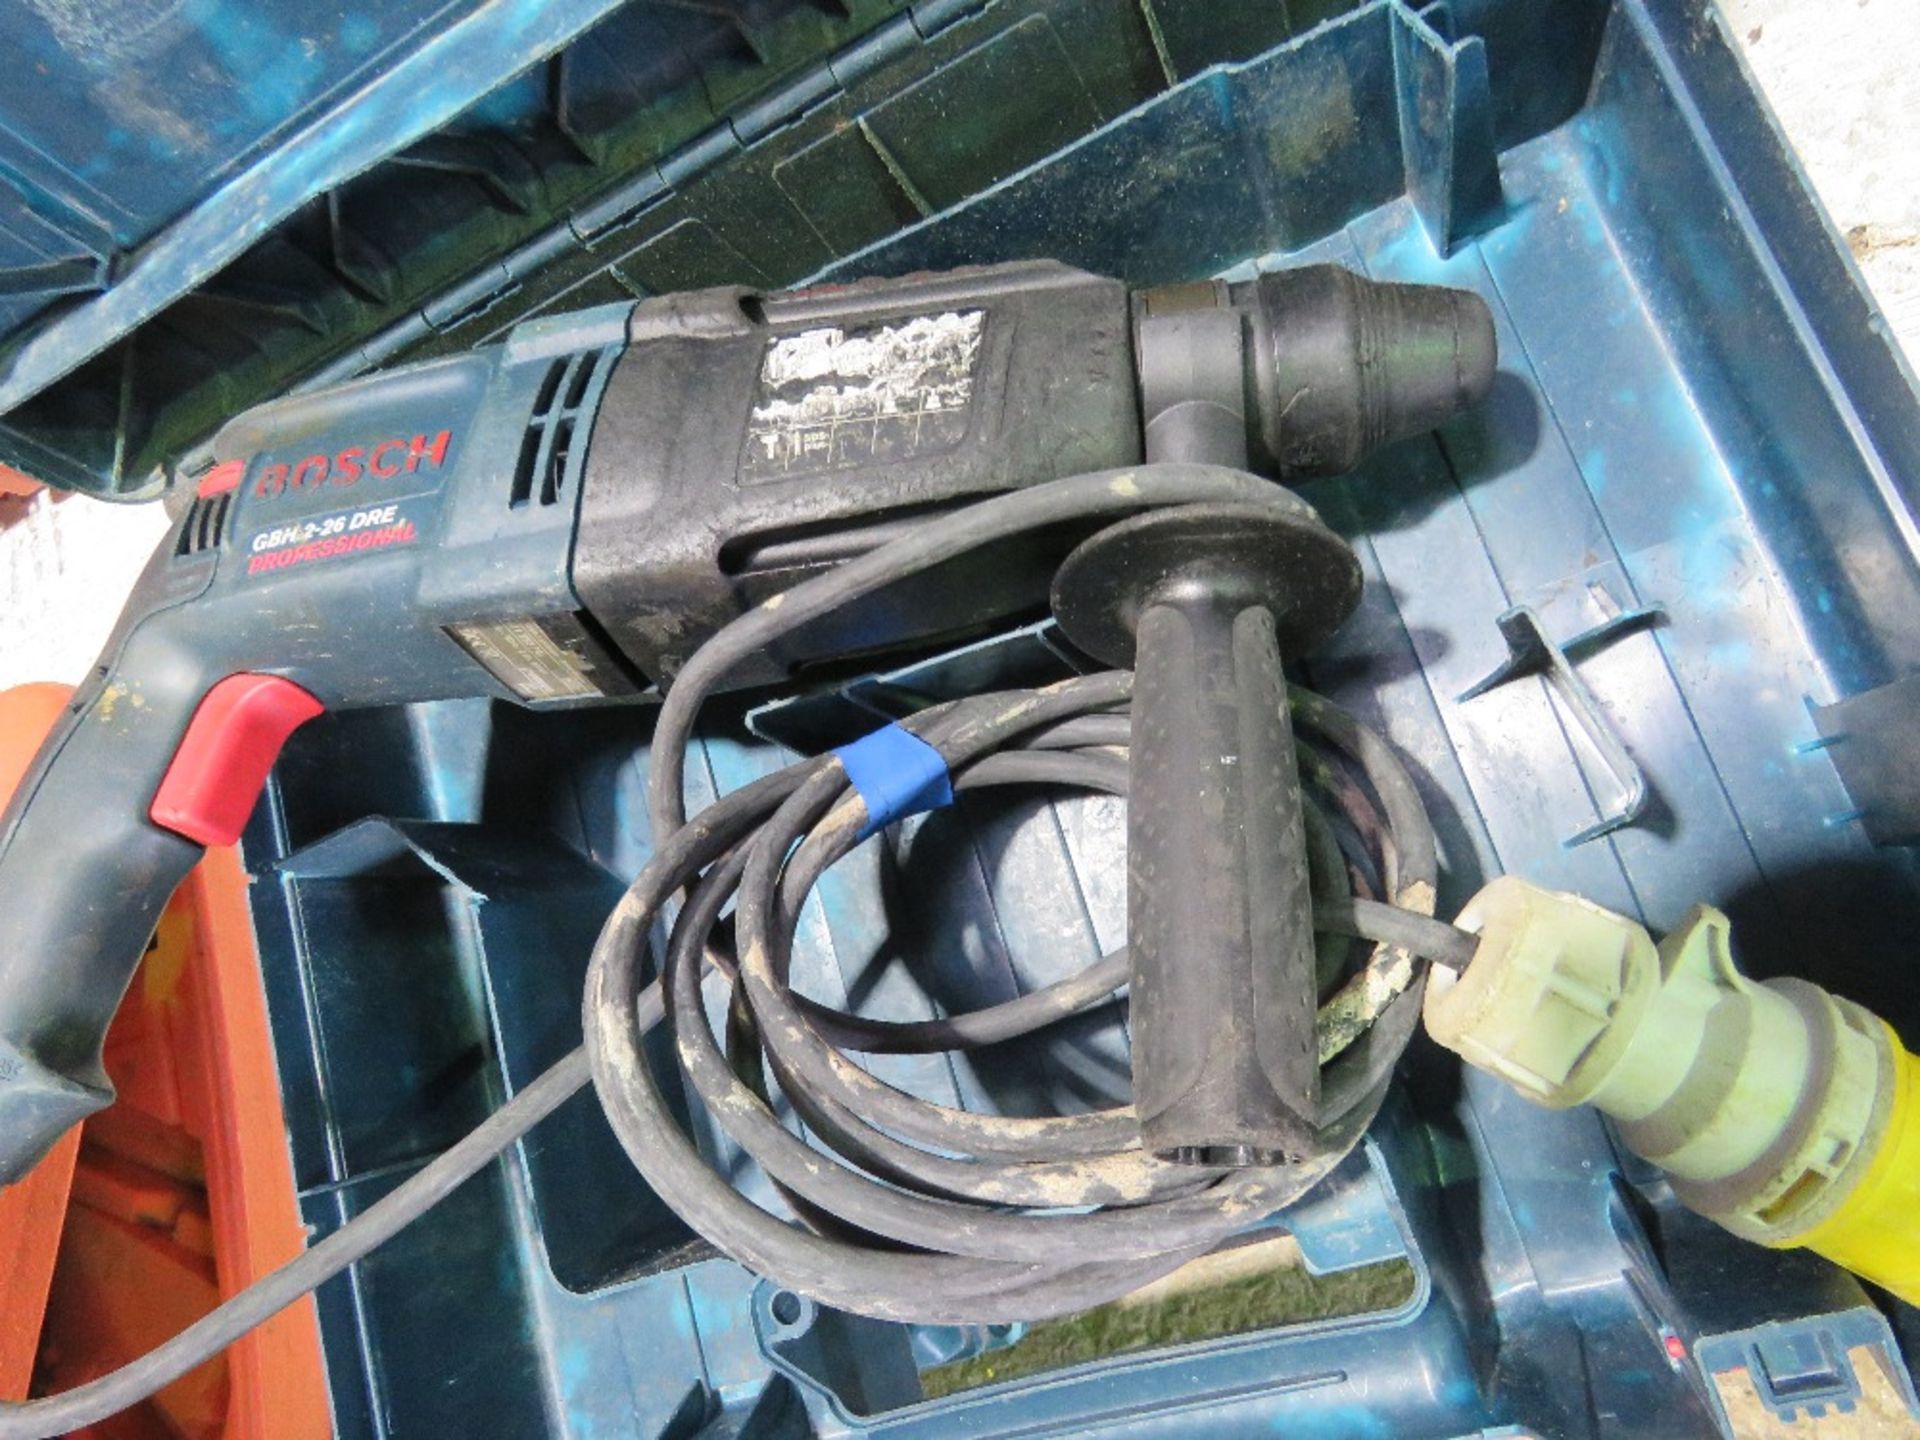 4NO 110VOLT POWERED DRILLS.....THIS LOT IS SOLD UNDER THE AUCTIONEERS MARGIN SCHEME, THEREFORE NO VA - Image 6 of 7